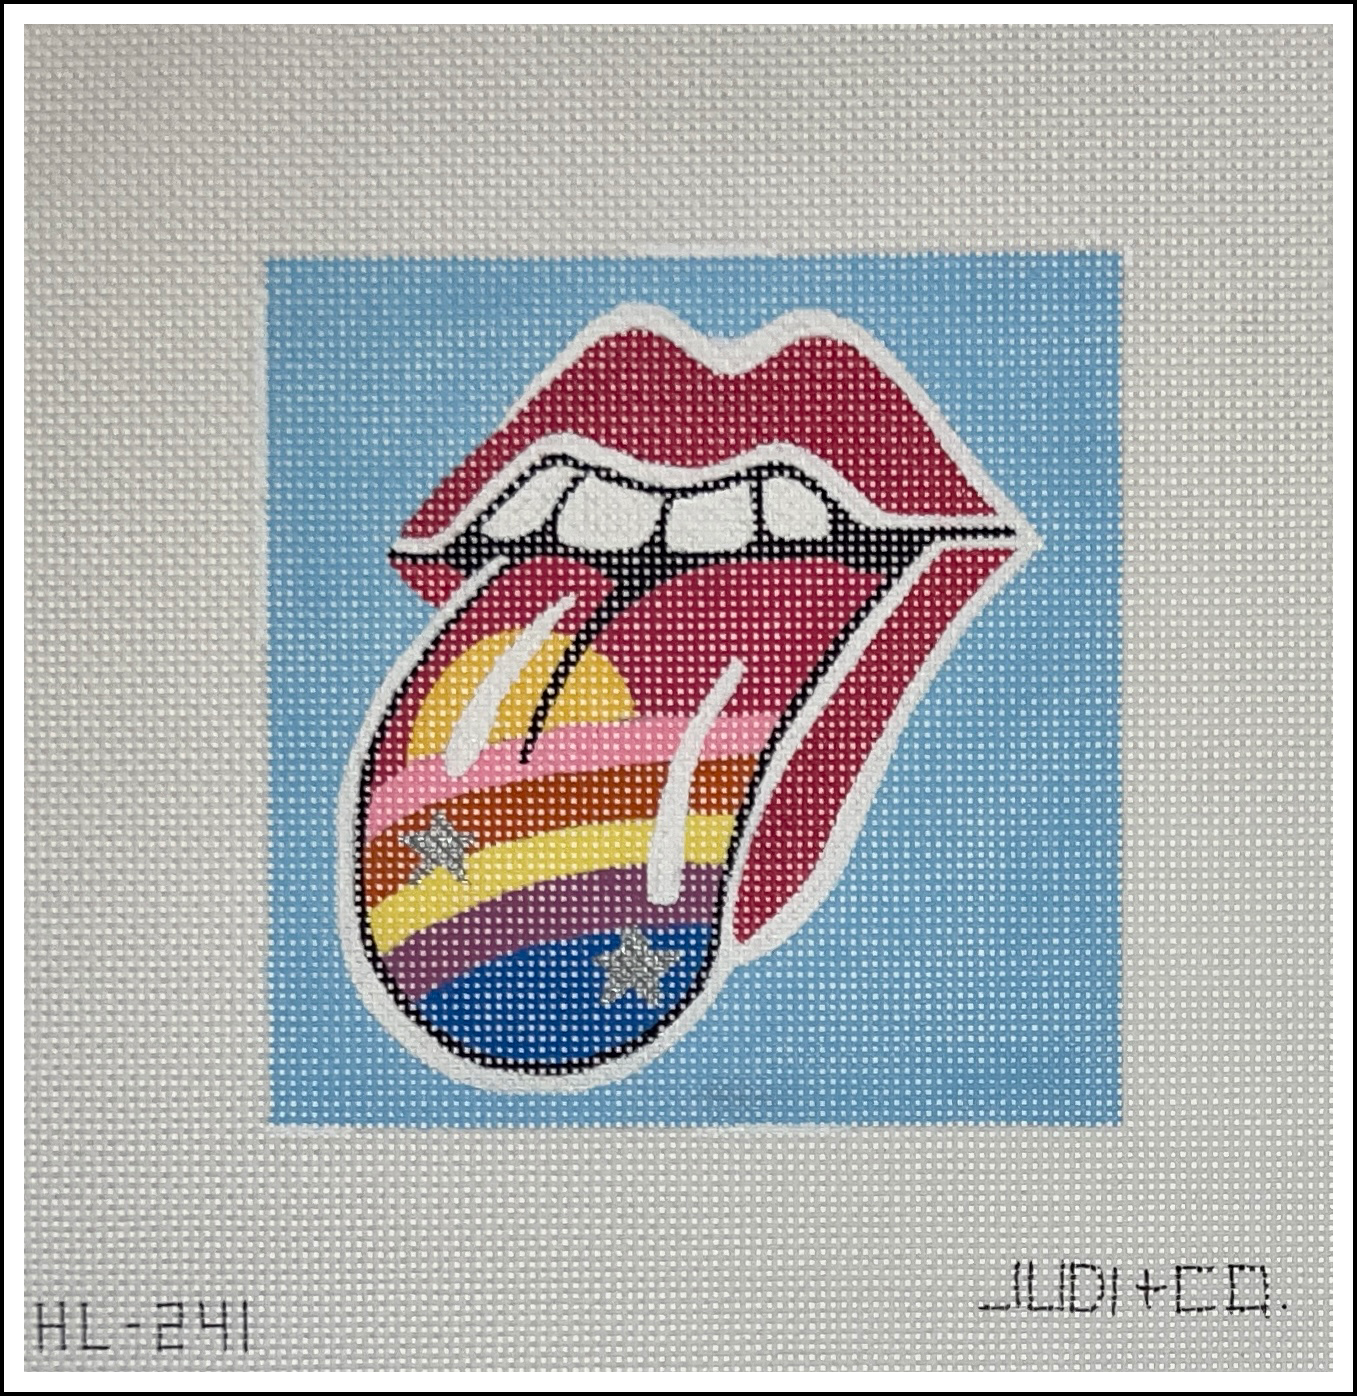 Hot Lips ...Rolling stones inspired canvas